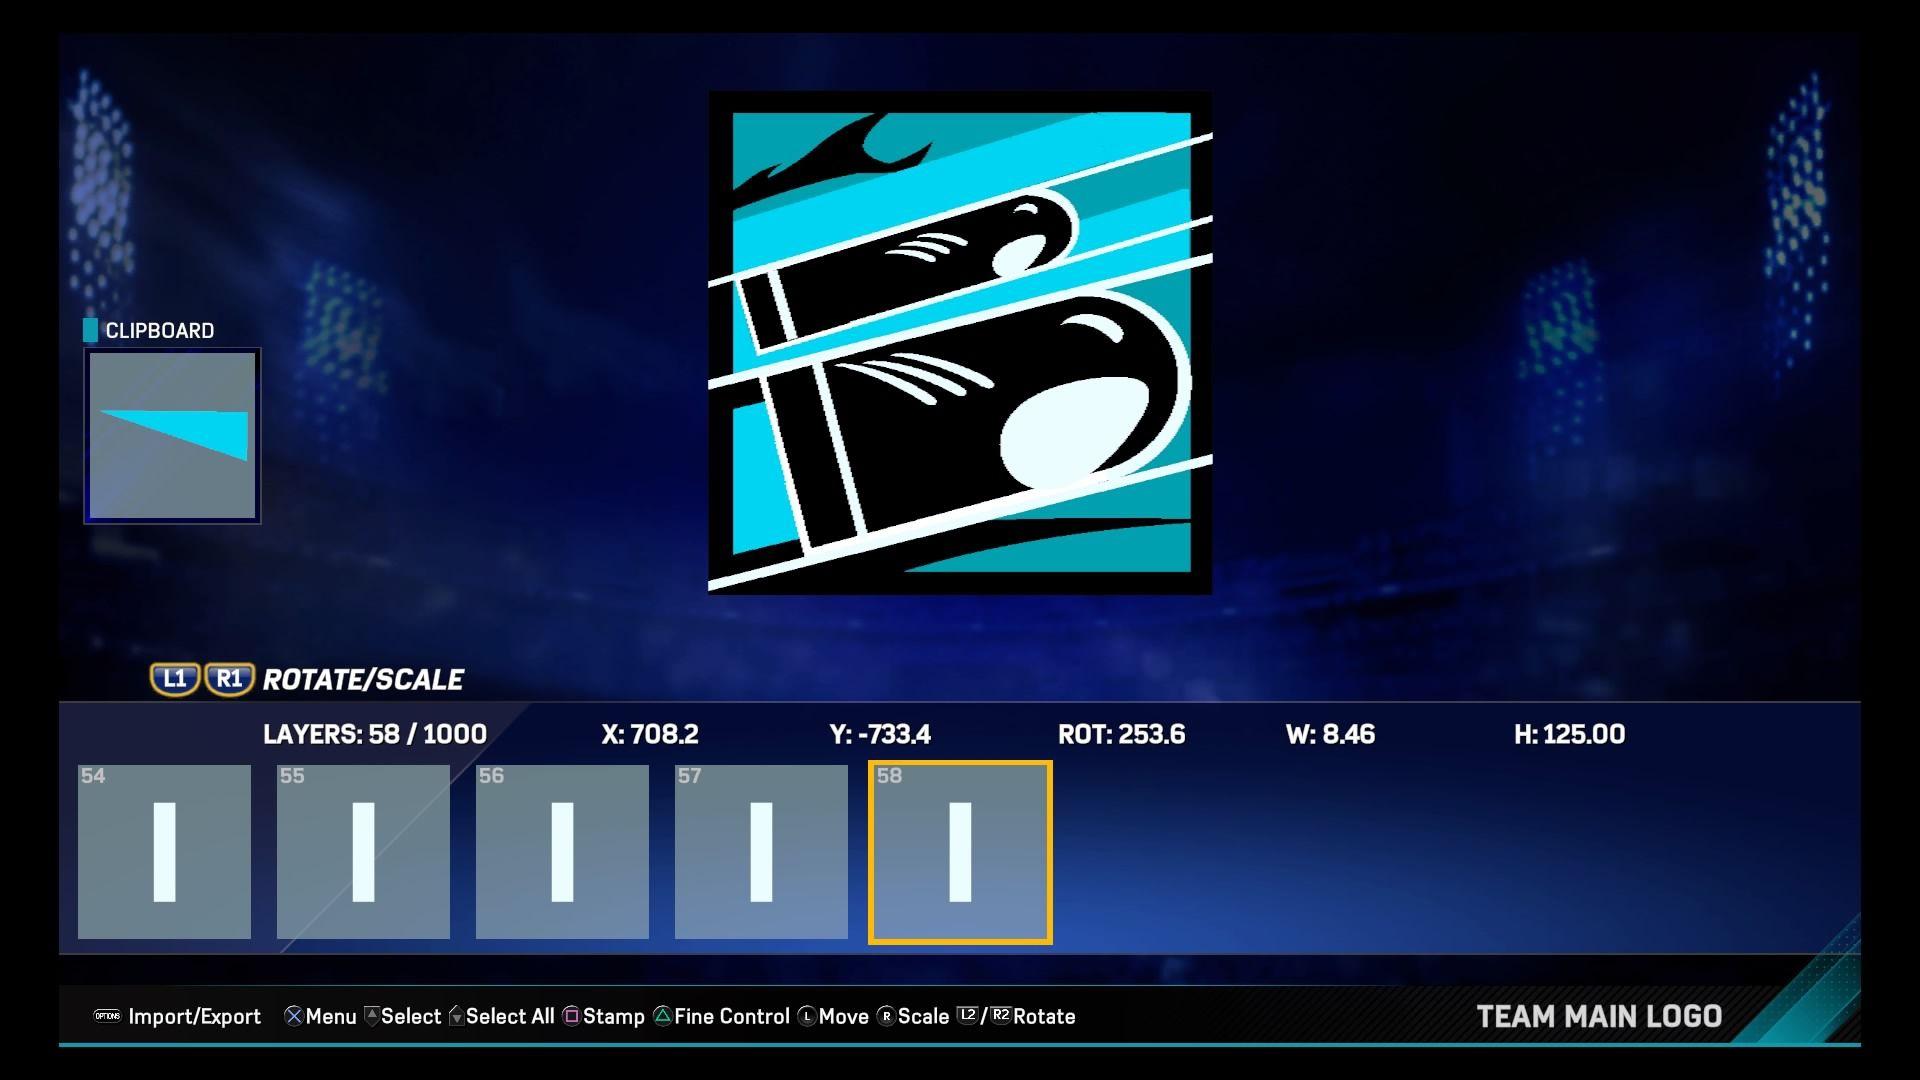 Welcome to the Show Logo - My Buck logo from MLB The Show 17!